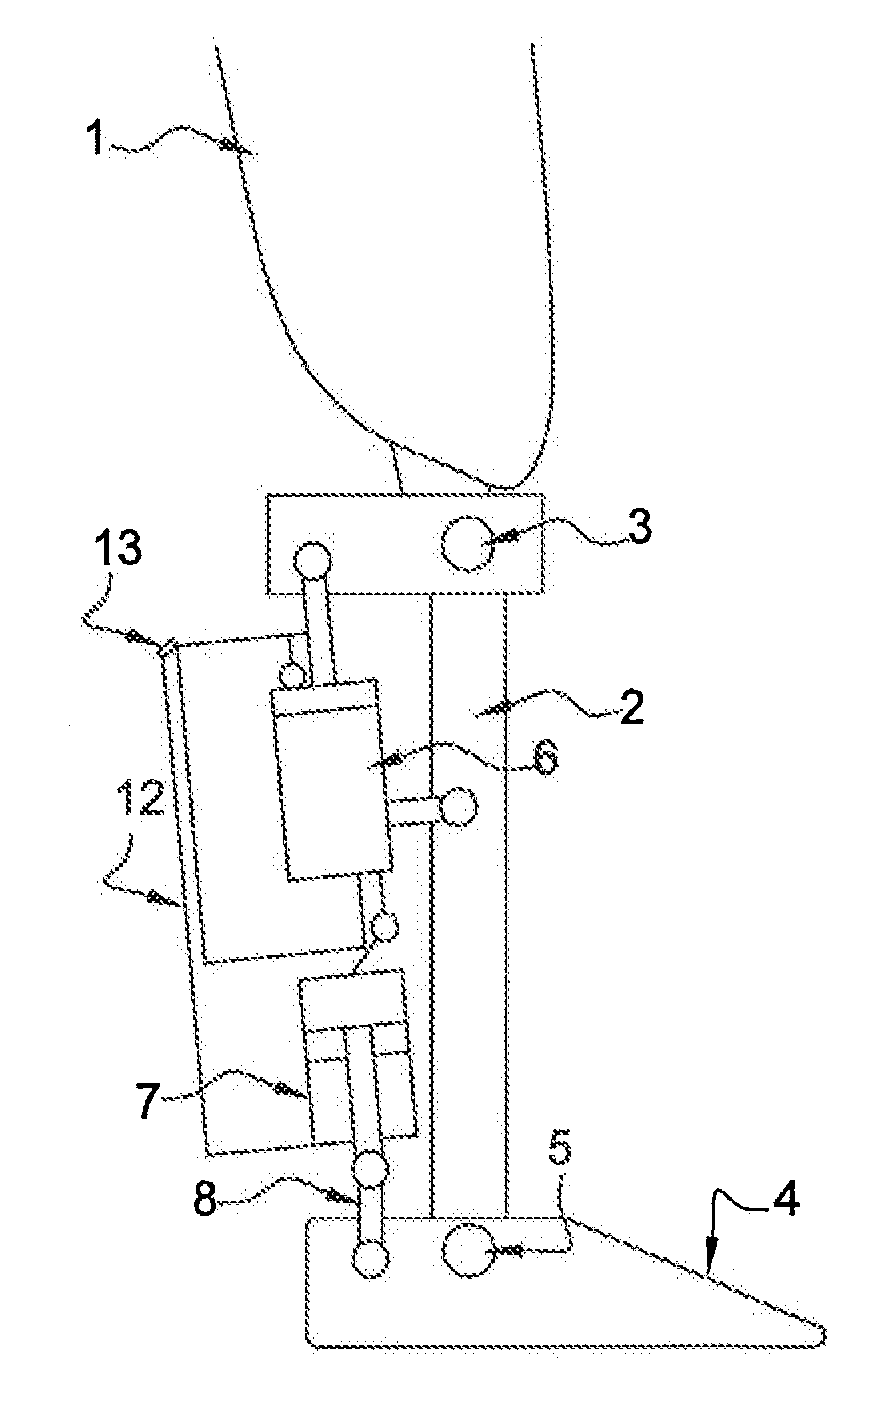 Hydraulic system for a knee-ankle assembly controlled by a microprocessor